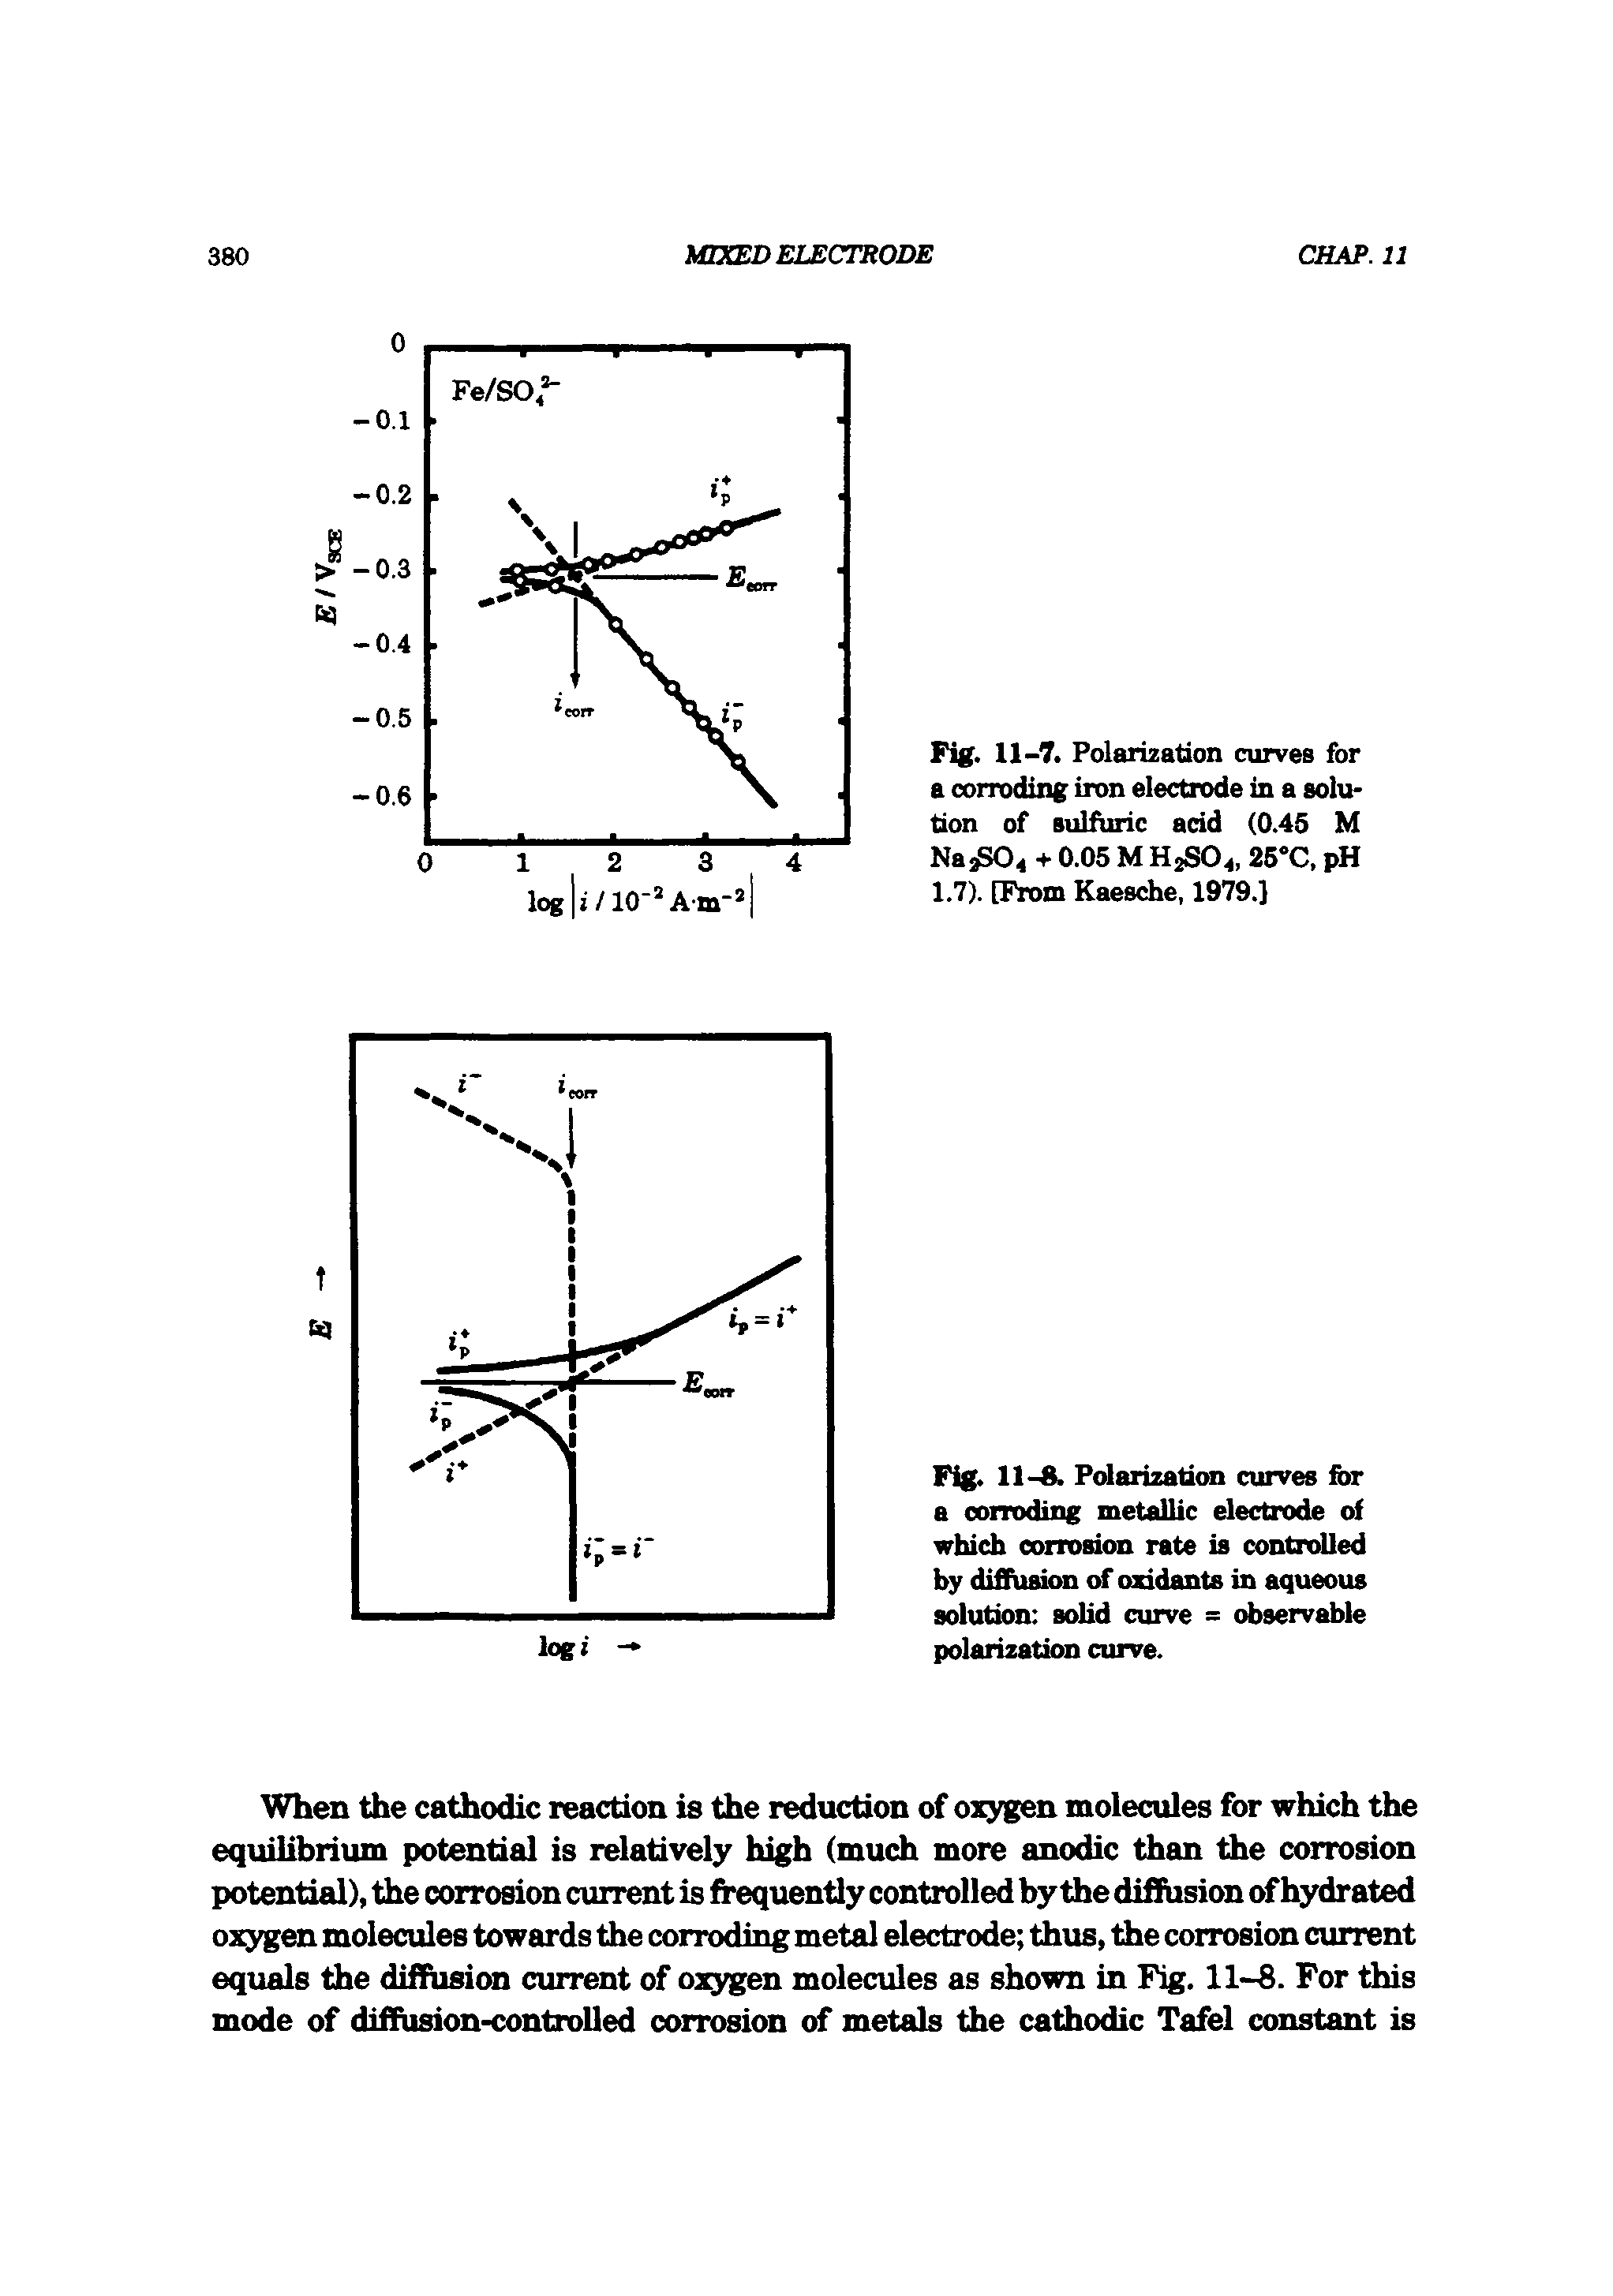 Fig. 11-7. Polarization curves for a corroding iron electrode in a solution of sulfuric acid (0.45 M NaiS04 + 0.05 M HjSO, 25 C, pH 1.7). [From Kaesche, 1979.]...